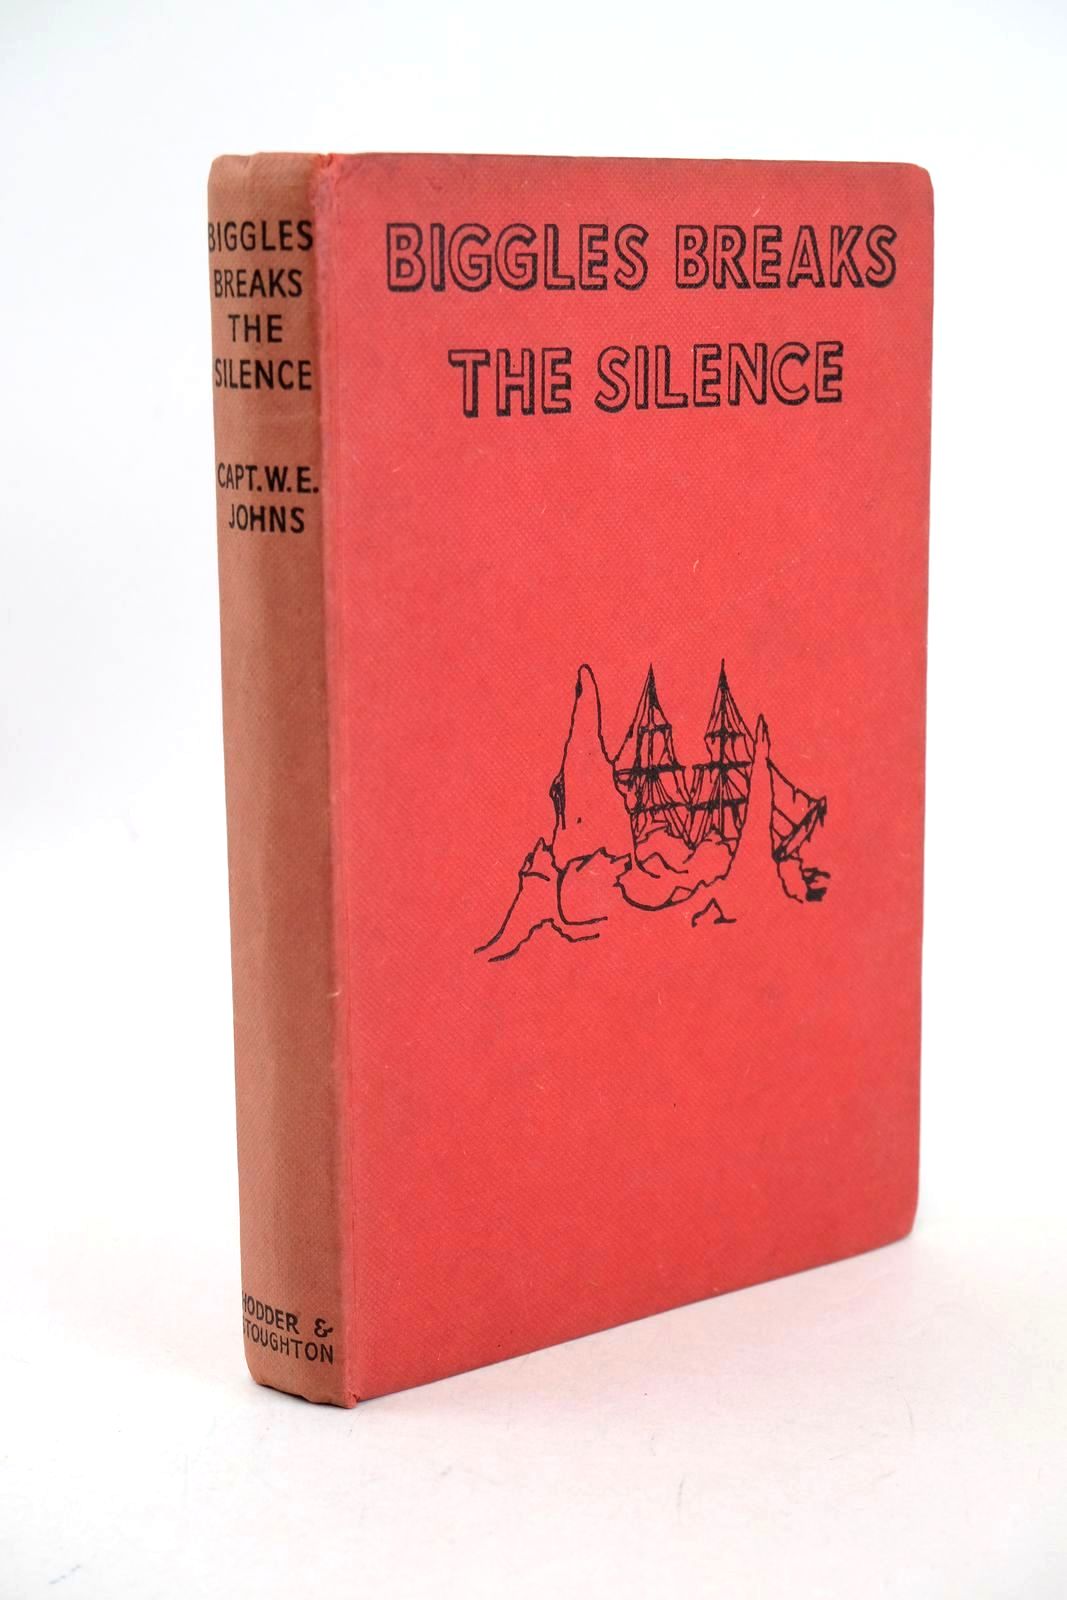 Photo of BIGGLES BREAKS THE SILENCE written by Johns, W.E. illustrated by Stead,  published by Hodder &amp; Stoughton (STOCK CODE: 1326683)  for sale by Stella & Rose's Books